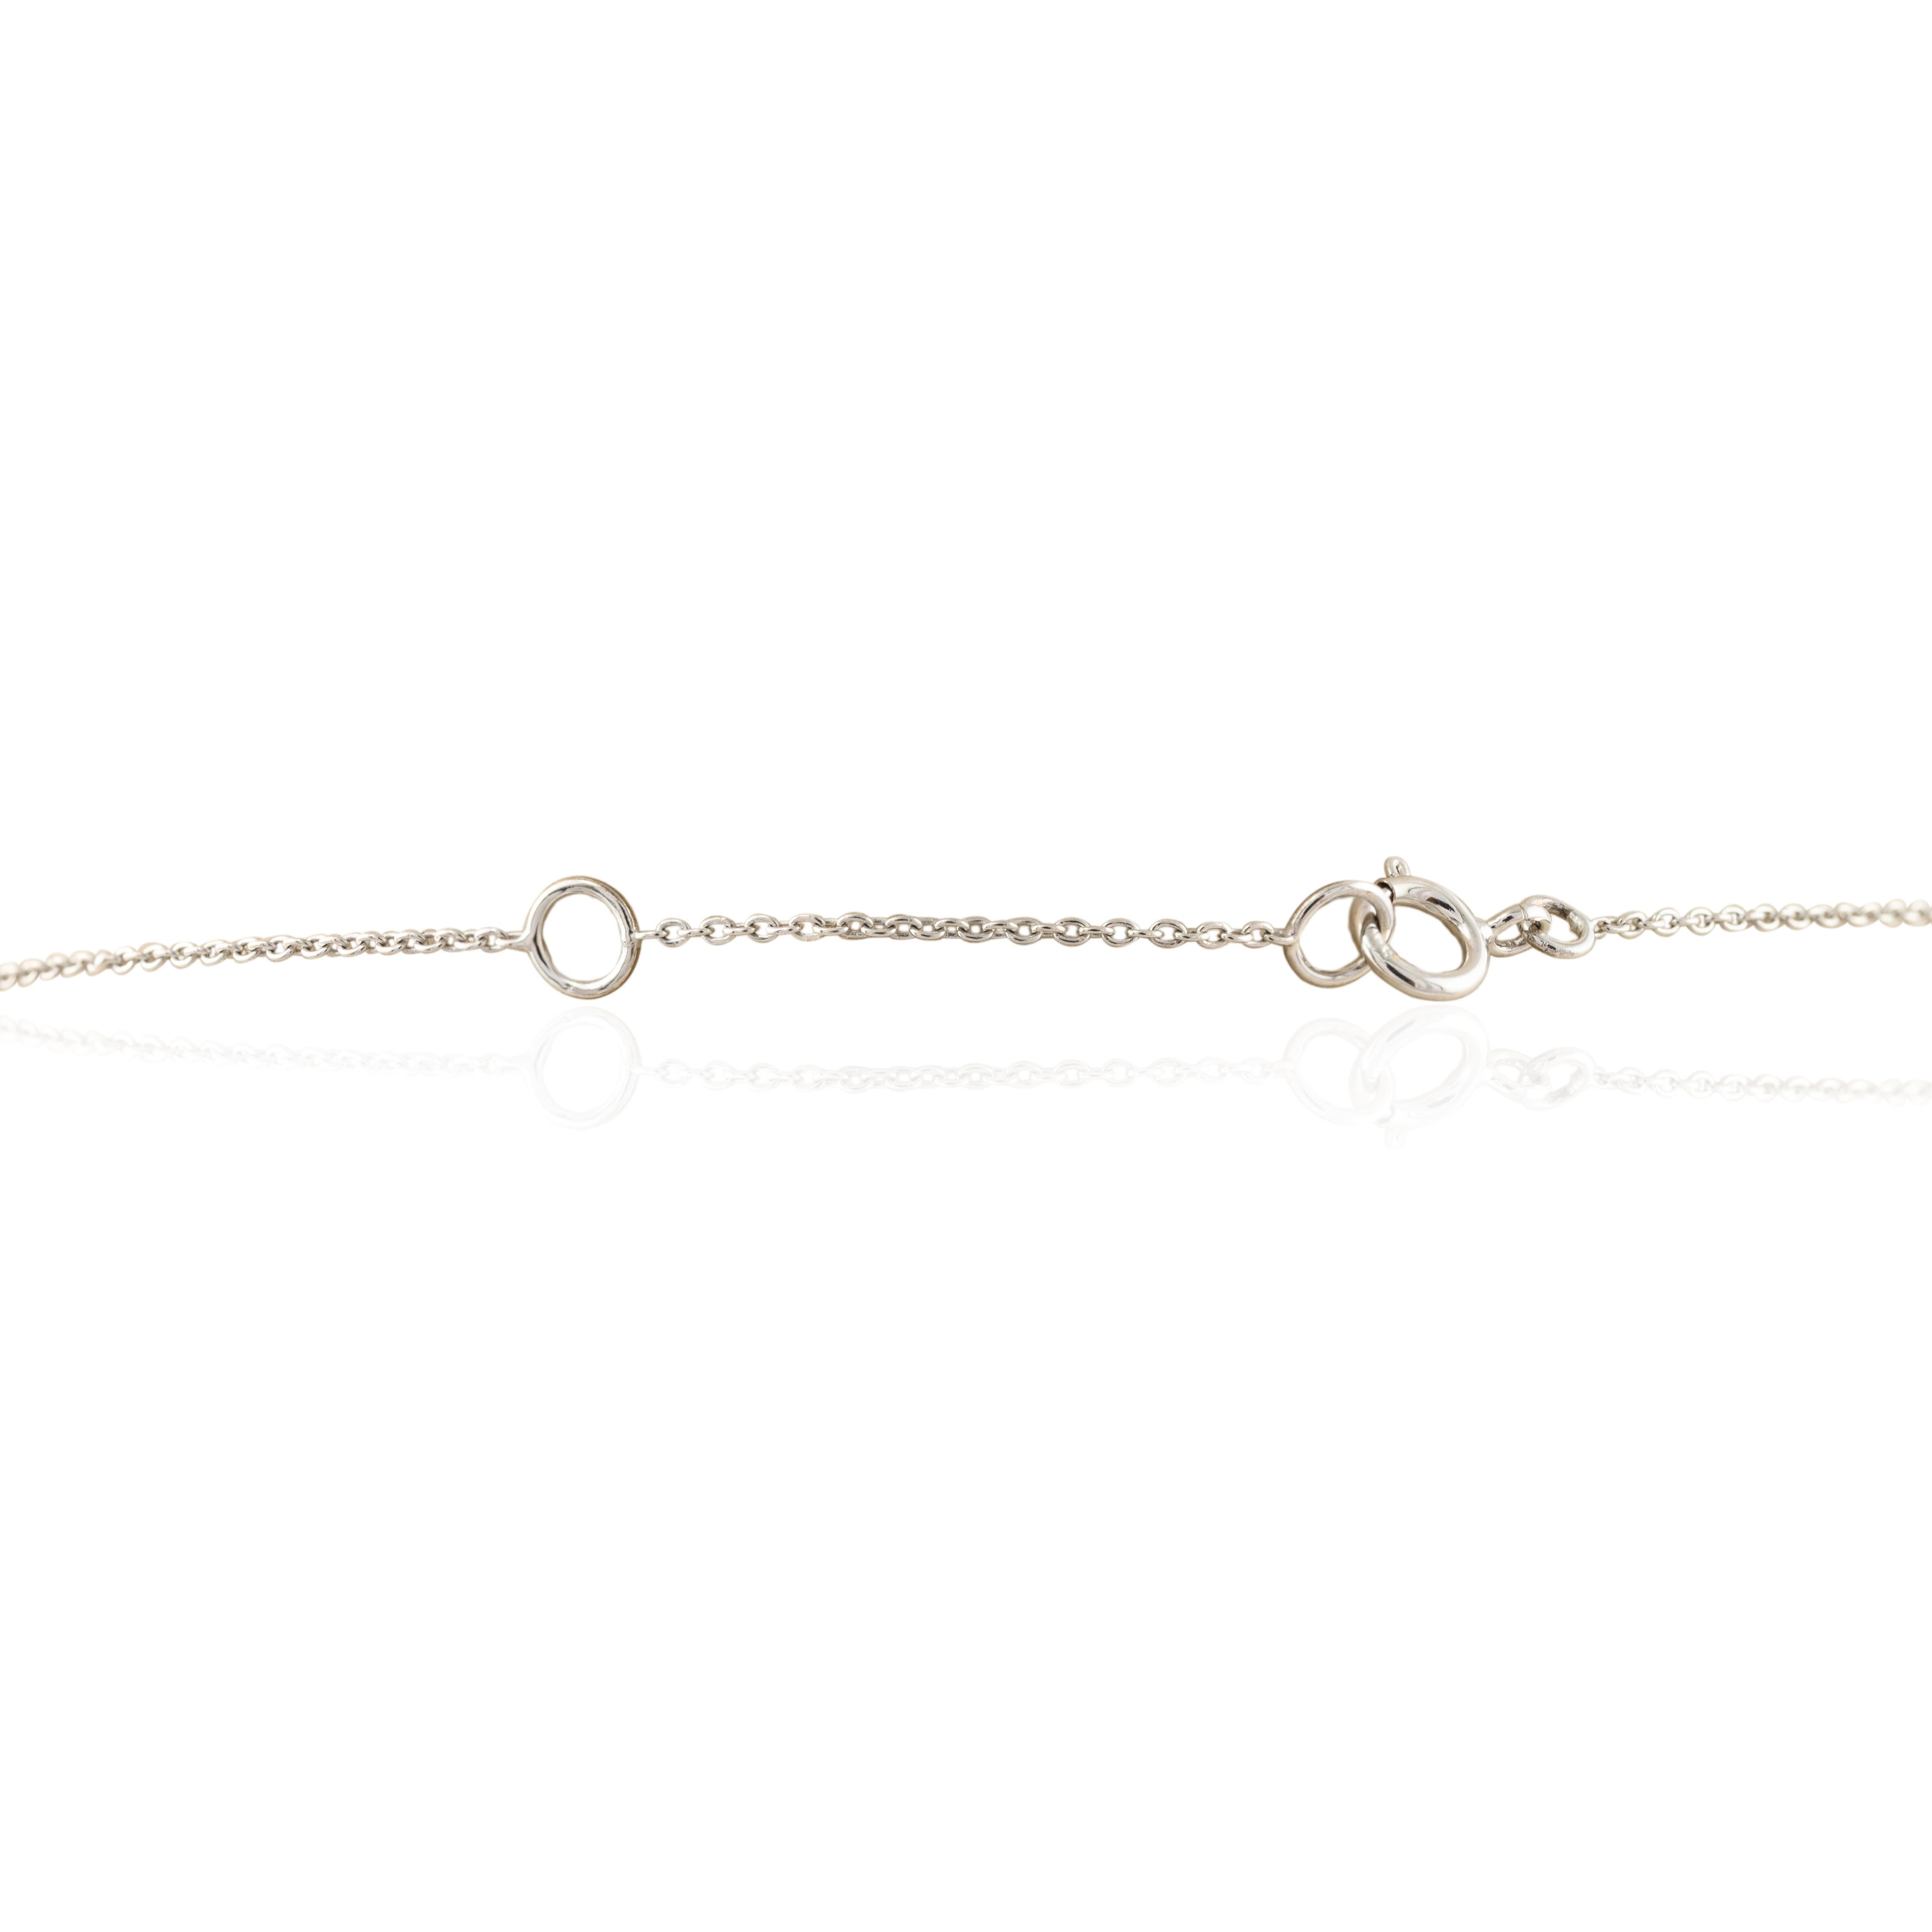 14k Solid White Gold Star Diamond Chain Necklace Gift For Her Neuf - En vente à Houston, TX